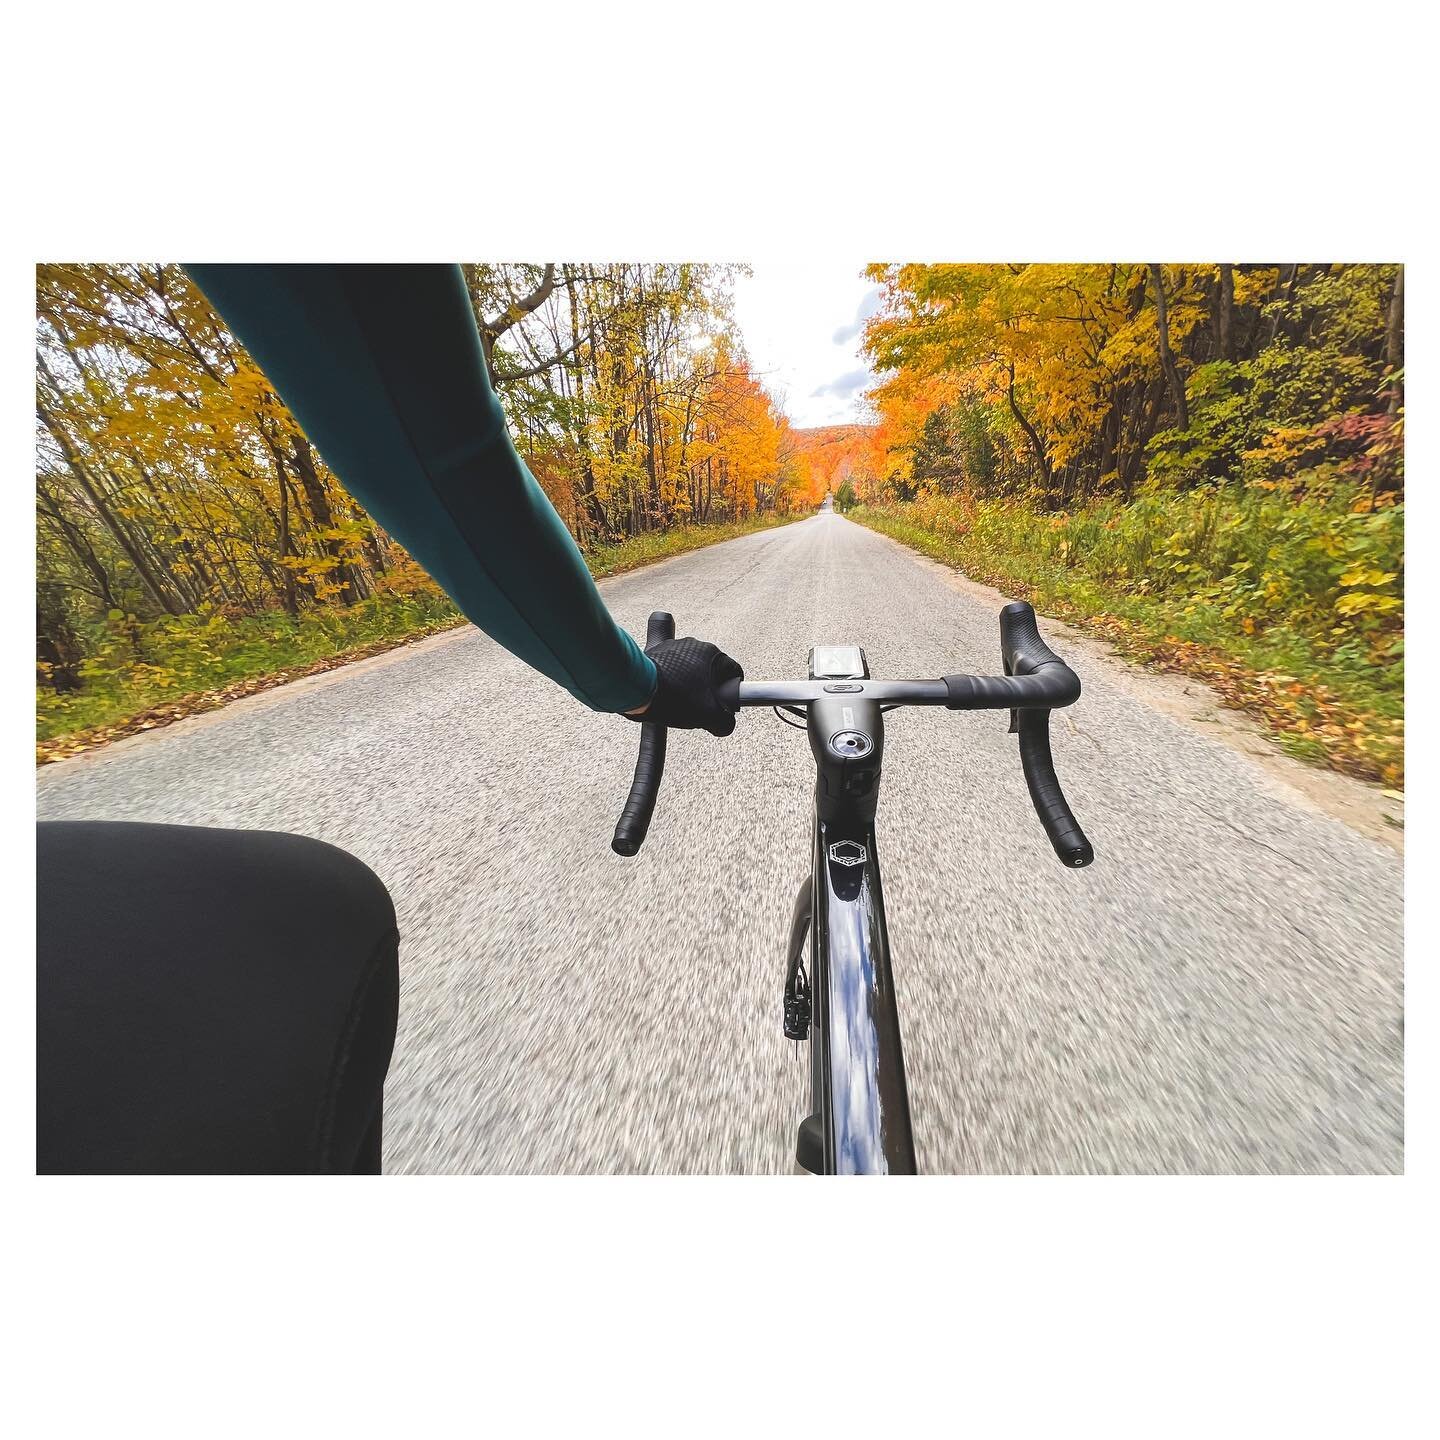 ⠀⠀⠀⠀⠀⠀⠀⠀⠀
This has been one of the best years in recent memory for autumn colours.  I love riding in the fall.  I&rsquo;m going to enjoy the last few days of colour before it fades off for another year.